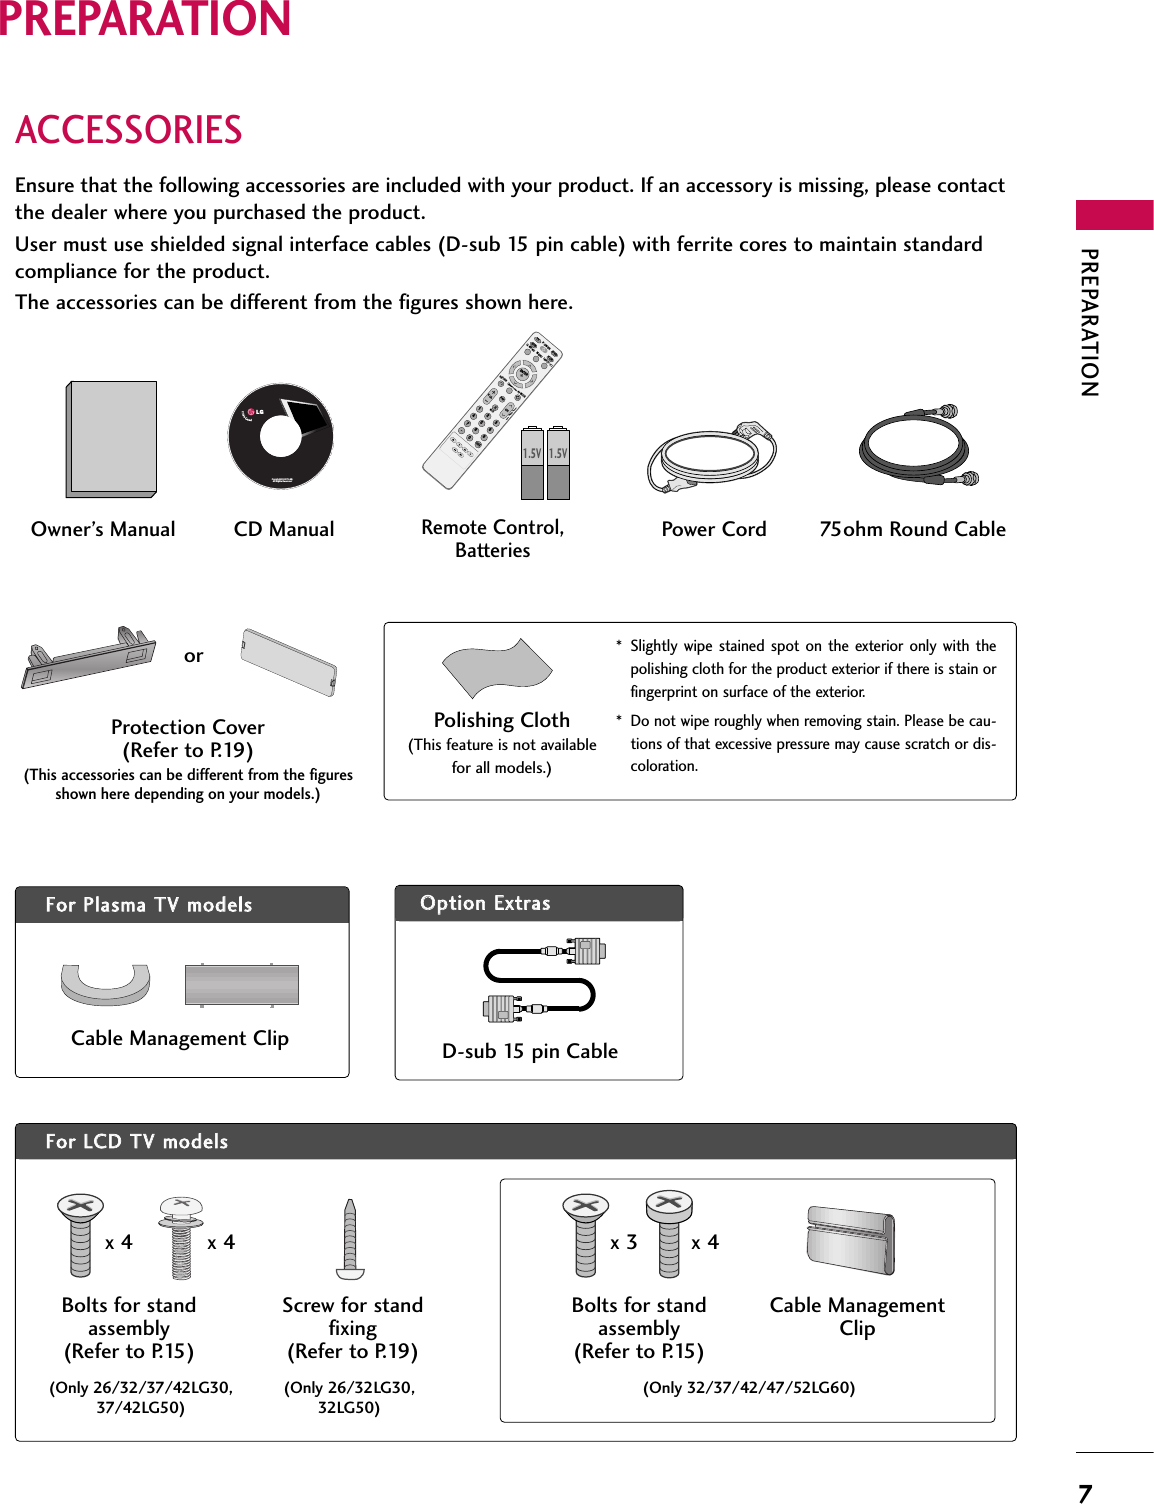 PREPARATION7PREPARATIONACCESSORIESEnsure that the following accessories are included with your product. If an accessory is missing, please contactthe dealer where you purchased the product. User must use shielded signal interface cables (D-sub 15 pin cable) with ferrite cores to maintain standardcompliance for the product.The accessories can be different from the figures shown here.OOppttiioonn EExxttrraassFFoorr LLCCDD TTVV mmooddeellssFFoorr PPllaassmmaa TTVV mmooddeellssCable Management ClipProtection Cover(Refer to P.19)(This accessories can be different from the figuresshown here depending on your models.)* Slightly wipe  stained  spot  on the  exterior  only with  thepolishing cloth for the product exterior if there is stain orfingerprint on surface of the exterior.* Do not wipe roughly when removing stain. Please be cau-tions of that excessive pressure may cause scratch or dis-coloration.Polishing Cloth(This feature is not availablefor all models.)Copyright© 2007 LGE,All Rights Reserved.D-sub 15 pin Cable1.5V 1.5VOwner’s Manual Power Cord 75ohm Round CableRemote Control,BatteriesINPUTFAVMUTETVSTBPOWERQ. MENUMENUAV MODERETURNENTERVOLCH1234567809FLASHBKPAGEDVDVCRCD Manual(Only 26/32/37/42LG30,37/42LG50)(Only 26/32LG30,32LG50)Bolts for standassembly(Refer to P.15)Screw for standfixing(Refer to P.19)x 4 x 4orCable ManagementClip(Only 32/37/42/47/52LG60)Bolts for standassembly(Refer to P.15)x 3 x 4